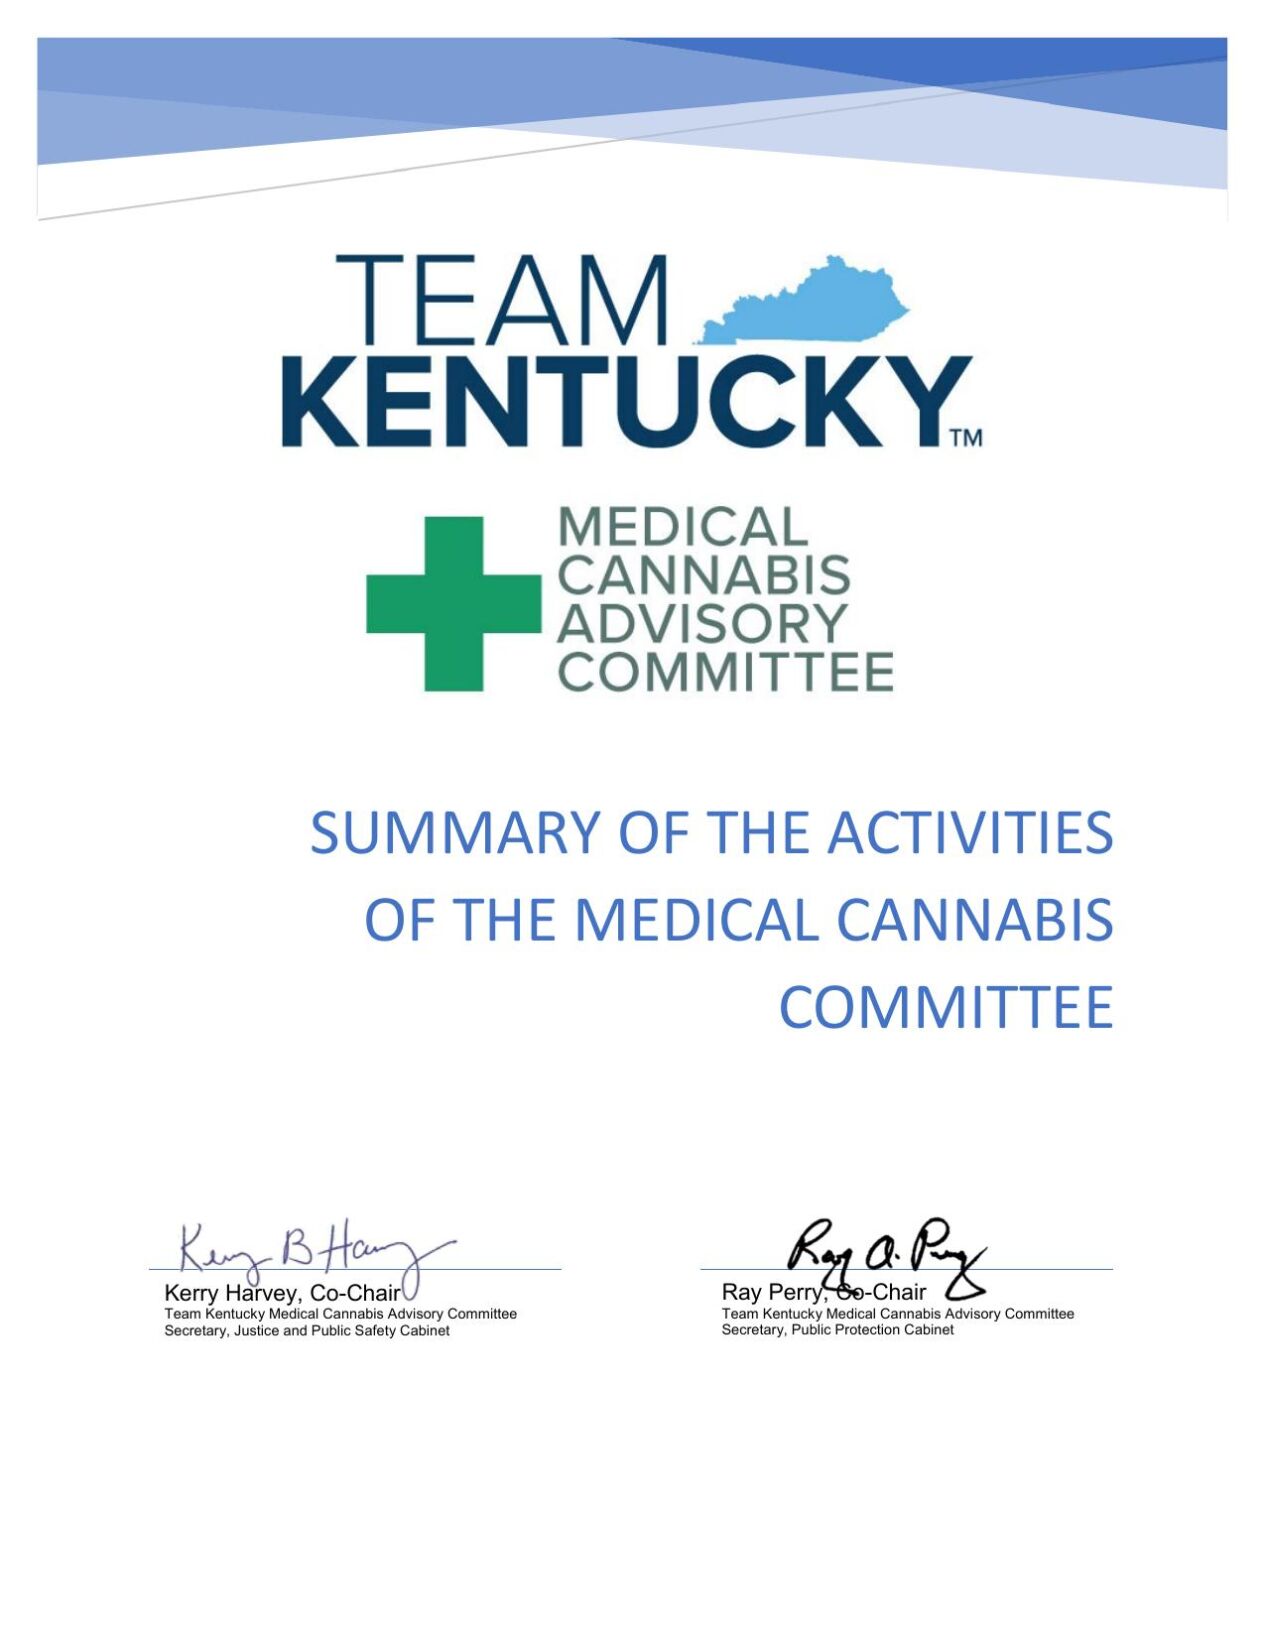 Kentucky Public Protection Cabinet